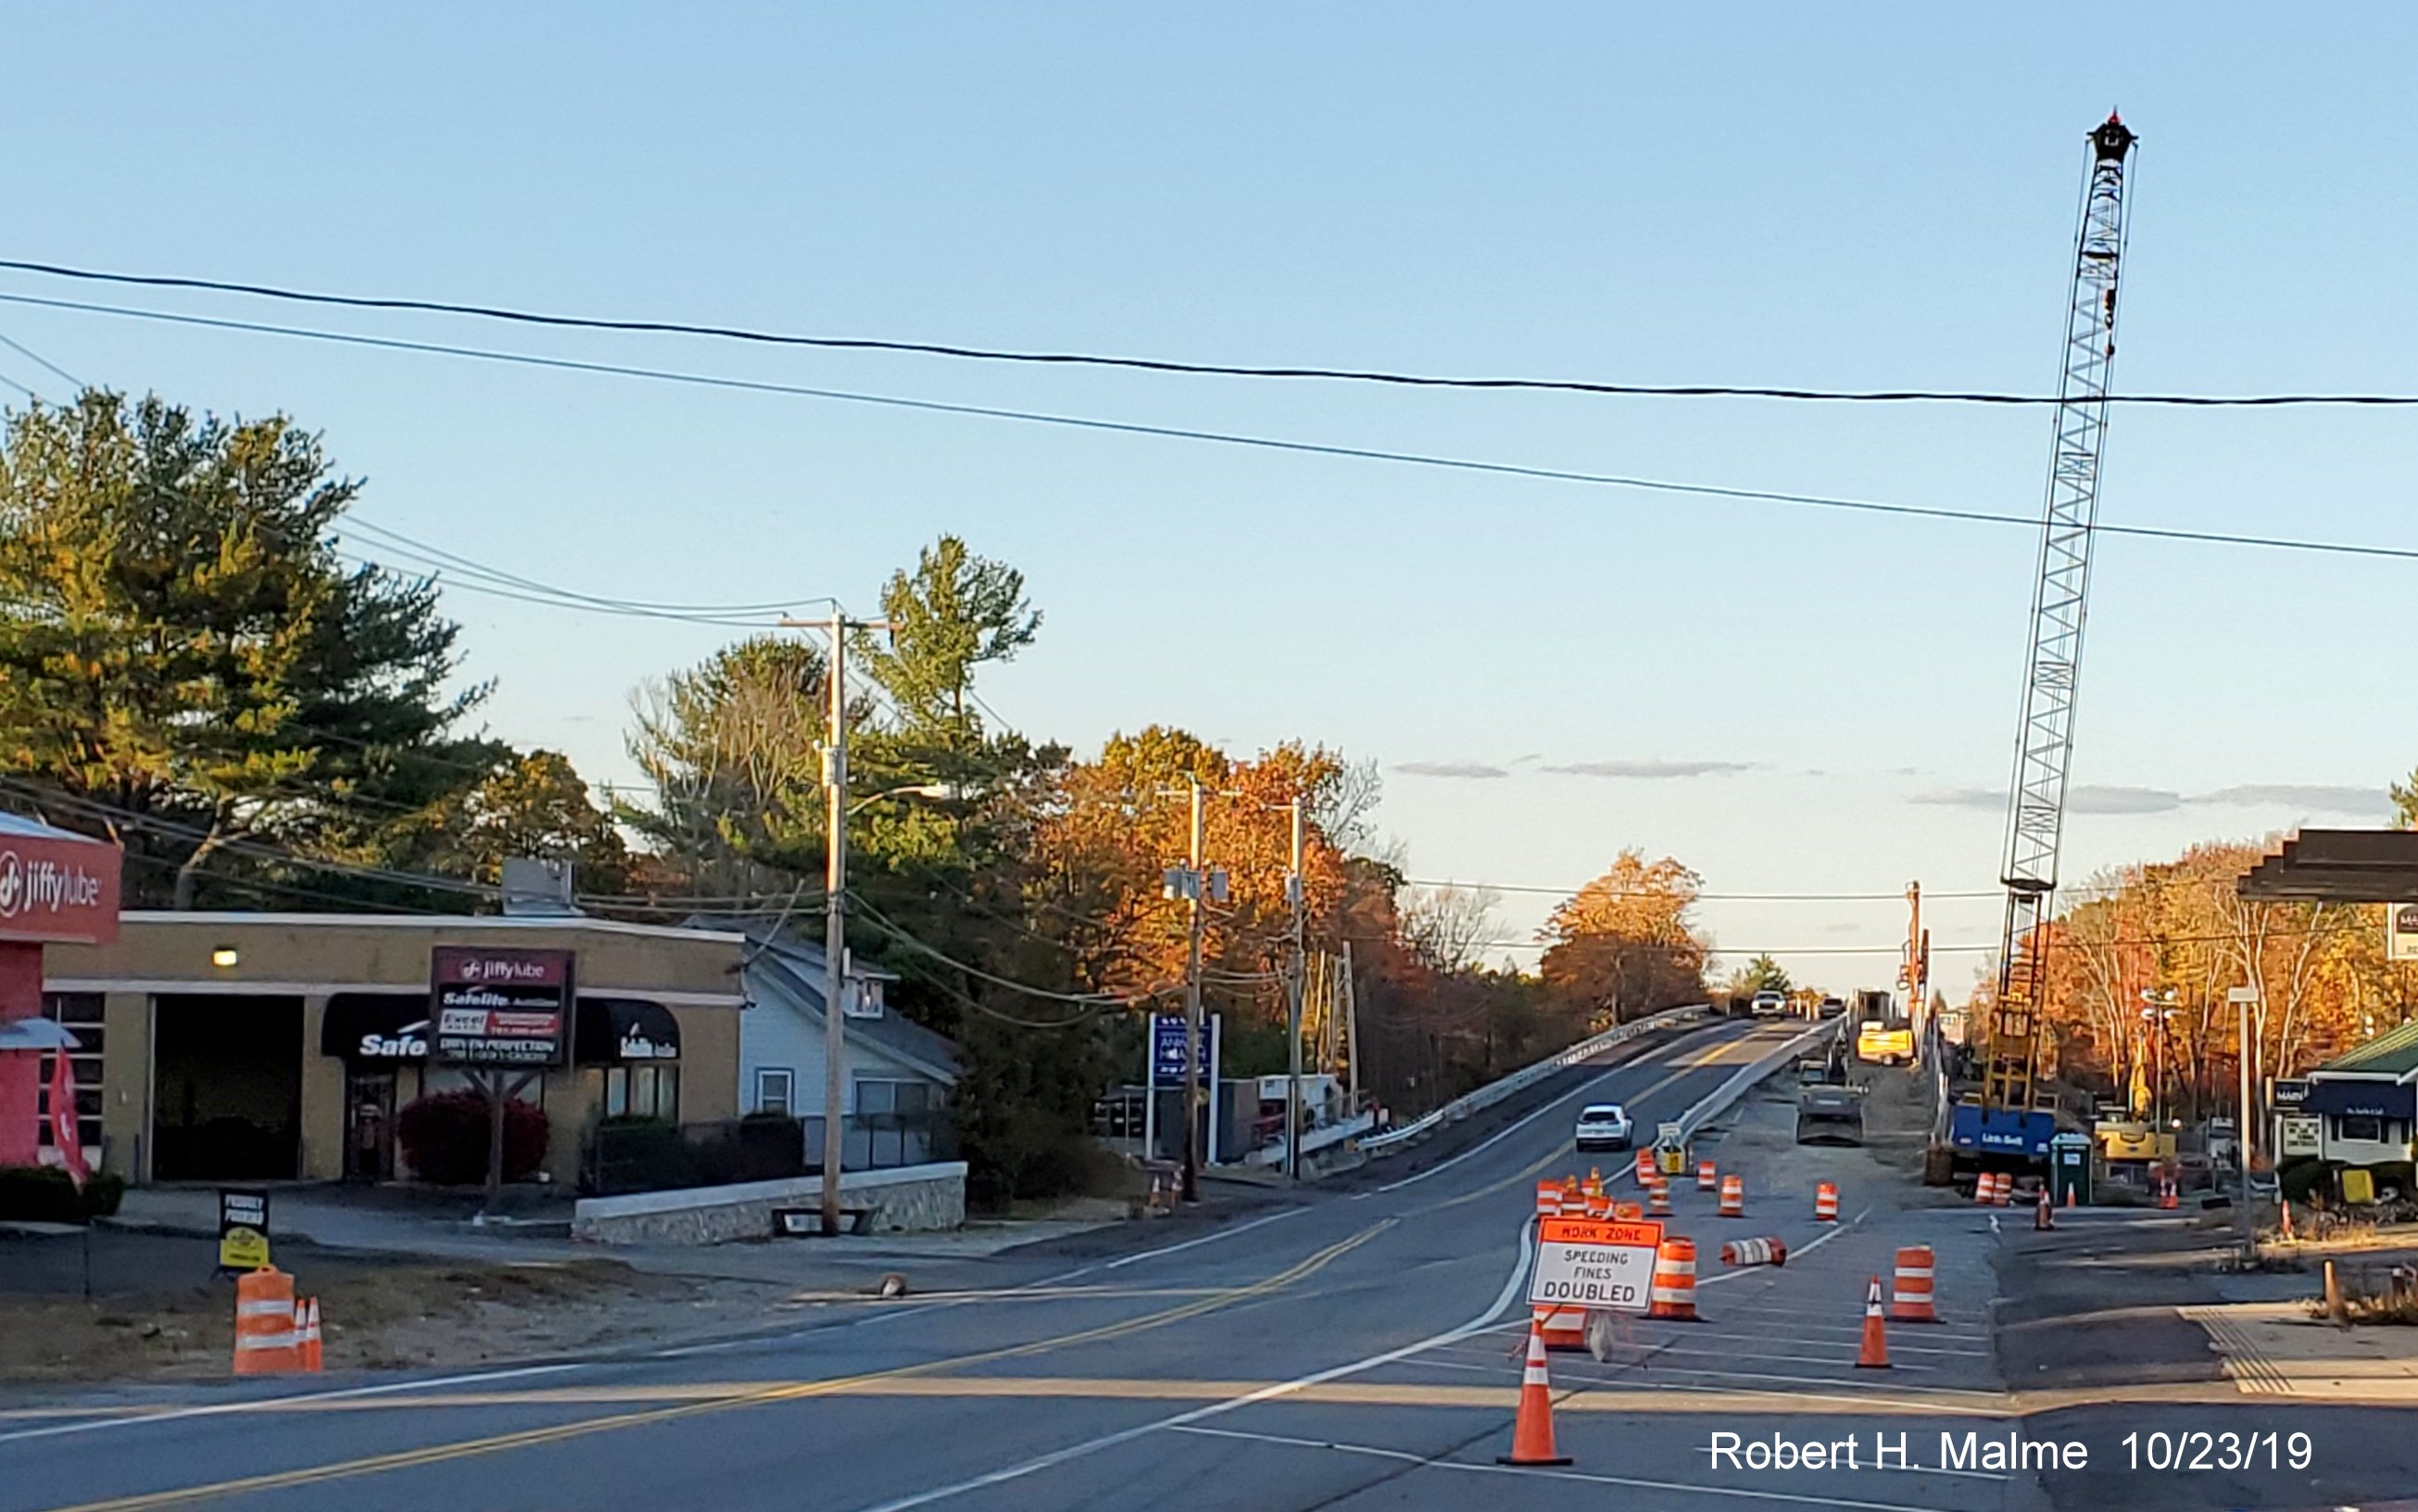 Image of construction of new MA 18 North lanes on commuter railroad bridge in South Weymouth as part of widening project